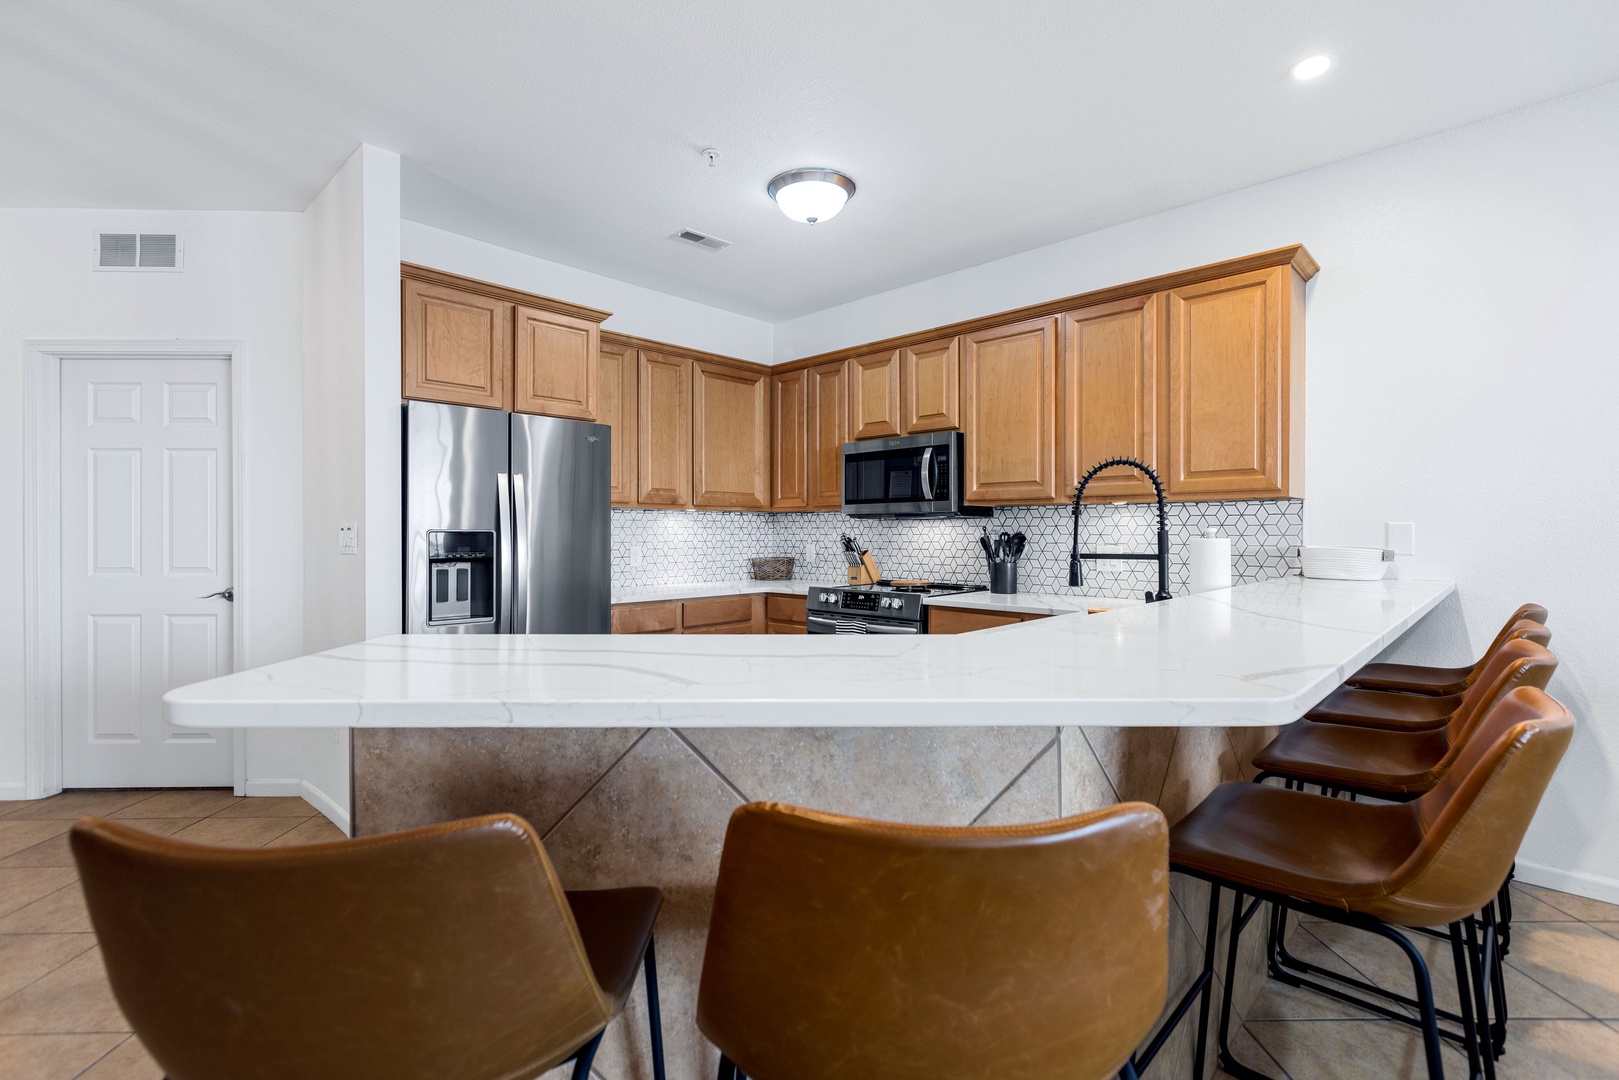 Sip morning coffee or grab a bite at the kitchen counter, with seating for 6